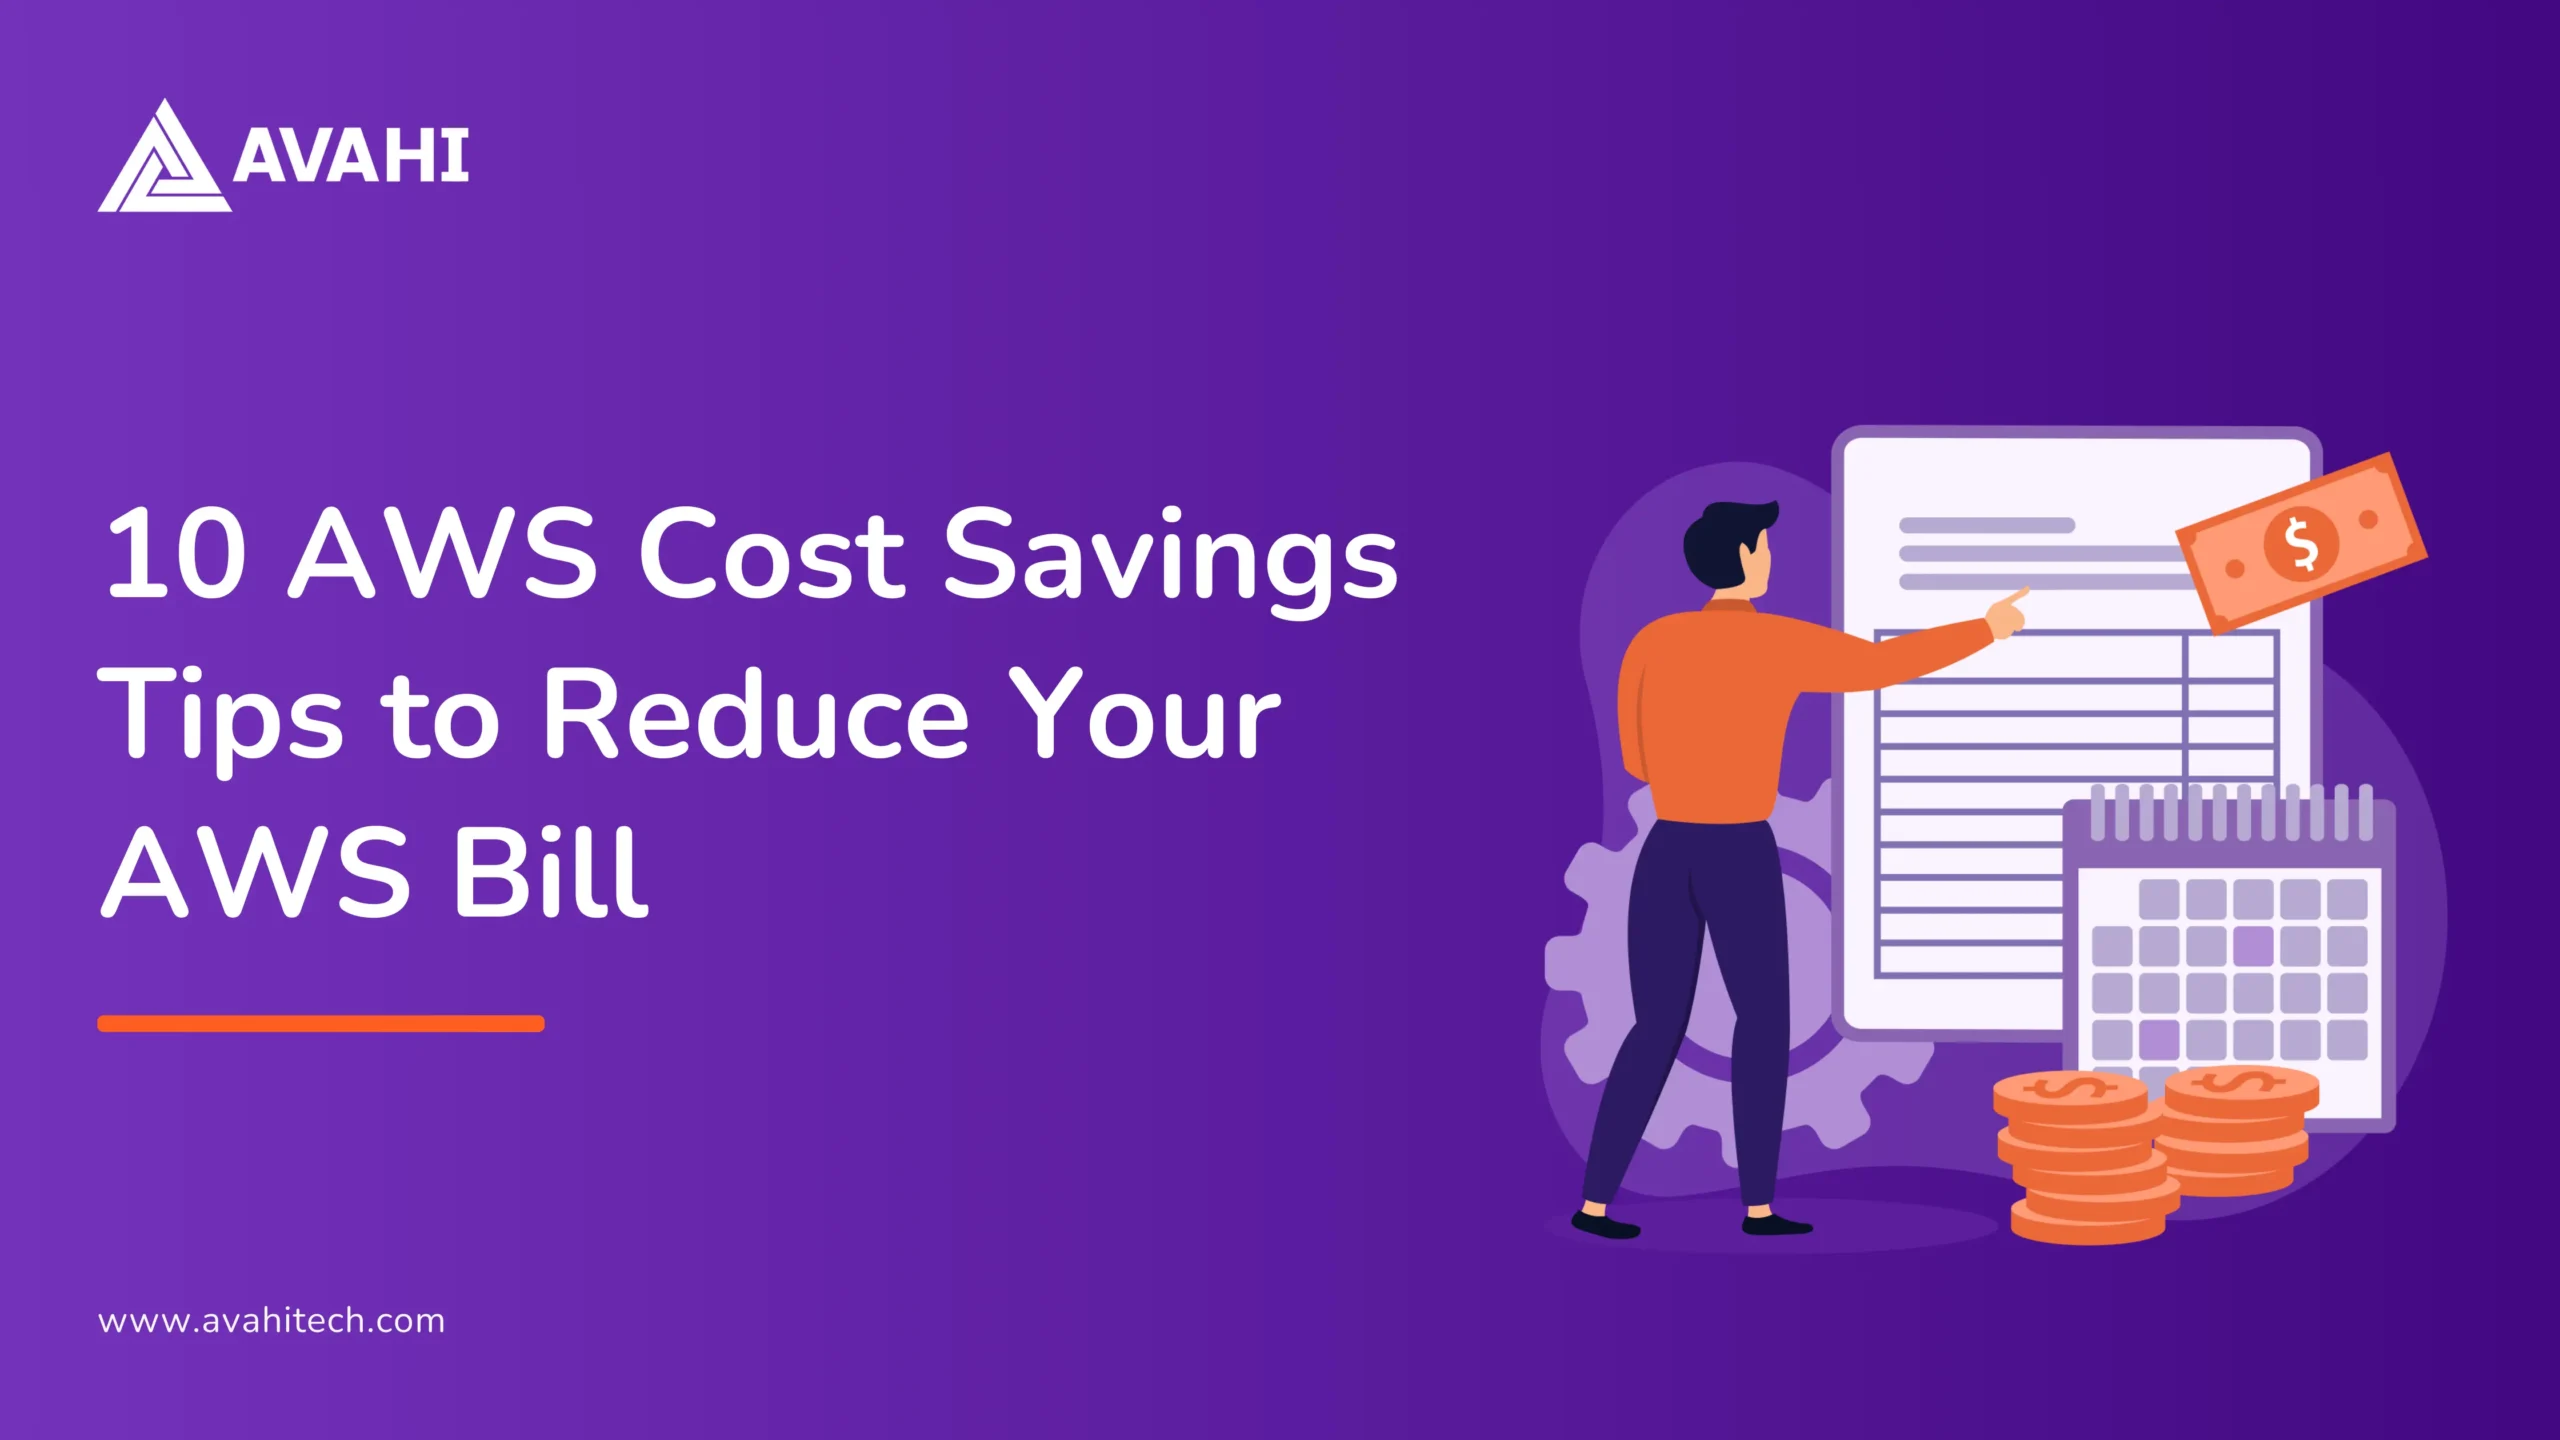 10 AWS Cost Savings Tips to Reduce Your AWS Bill